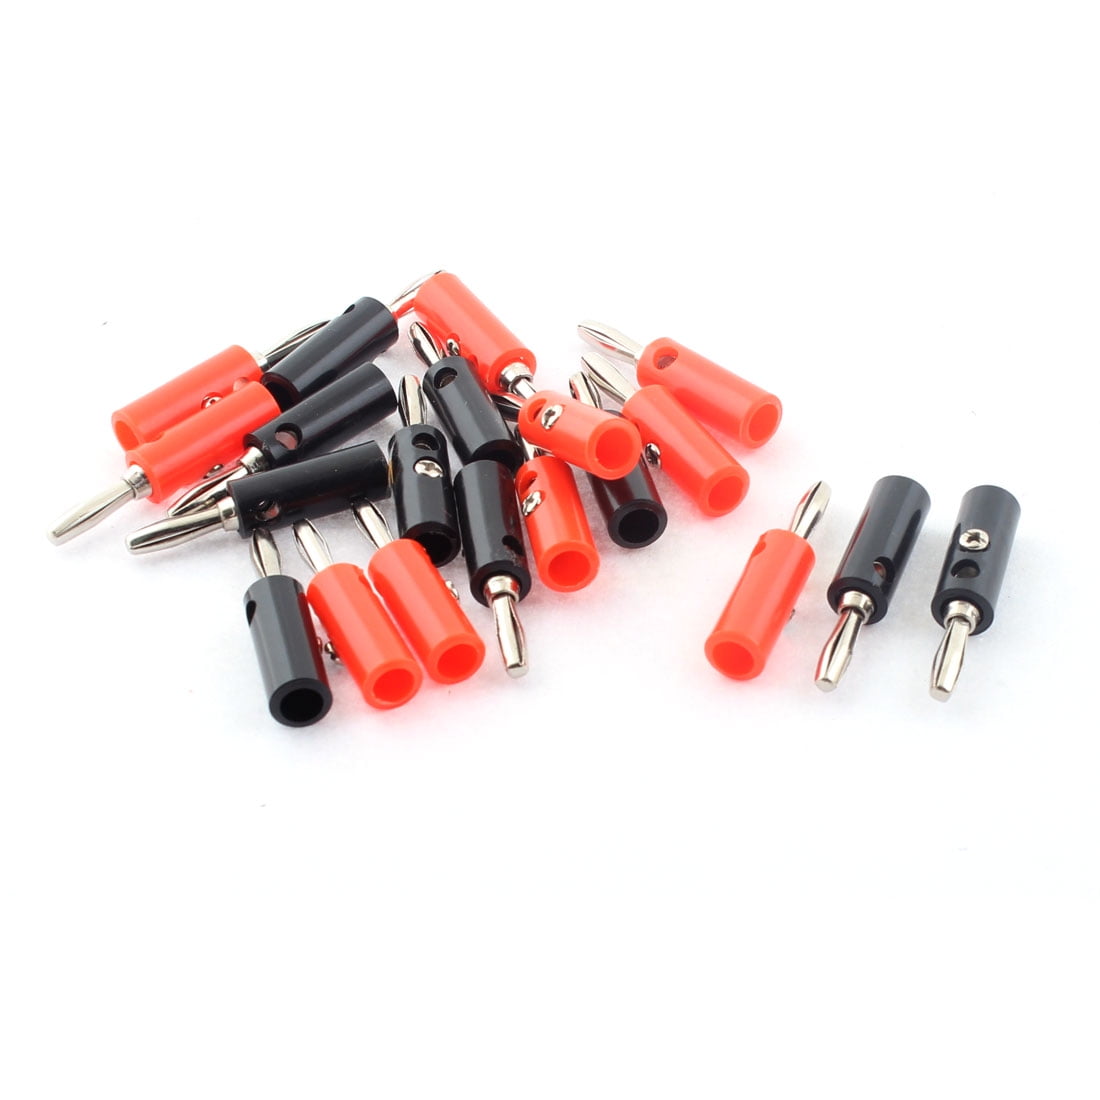 4pcs Black&Red Set 4mm Iron Pin Banana Plug Speaker Screw Wire Cable Connector 